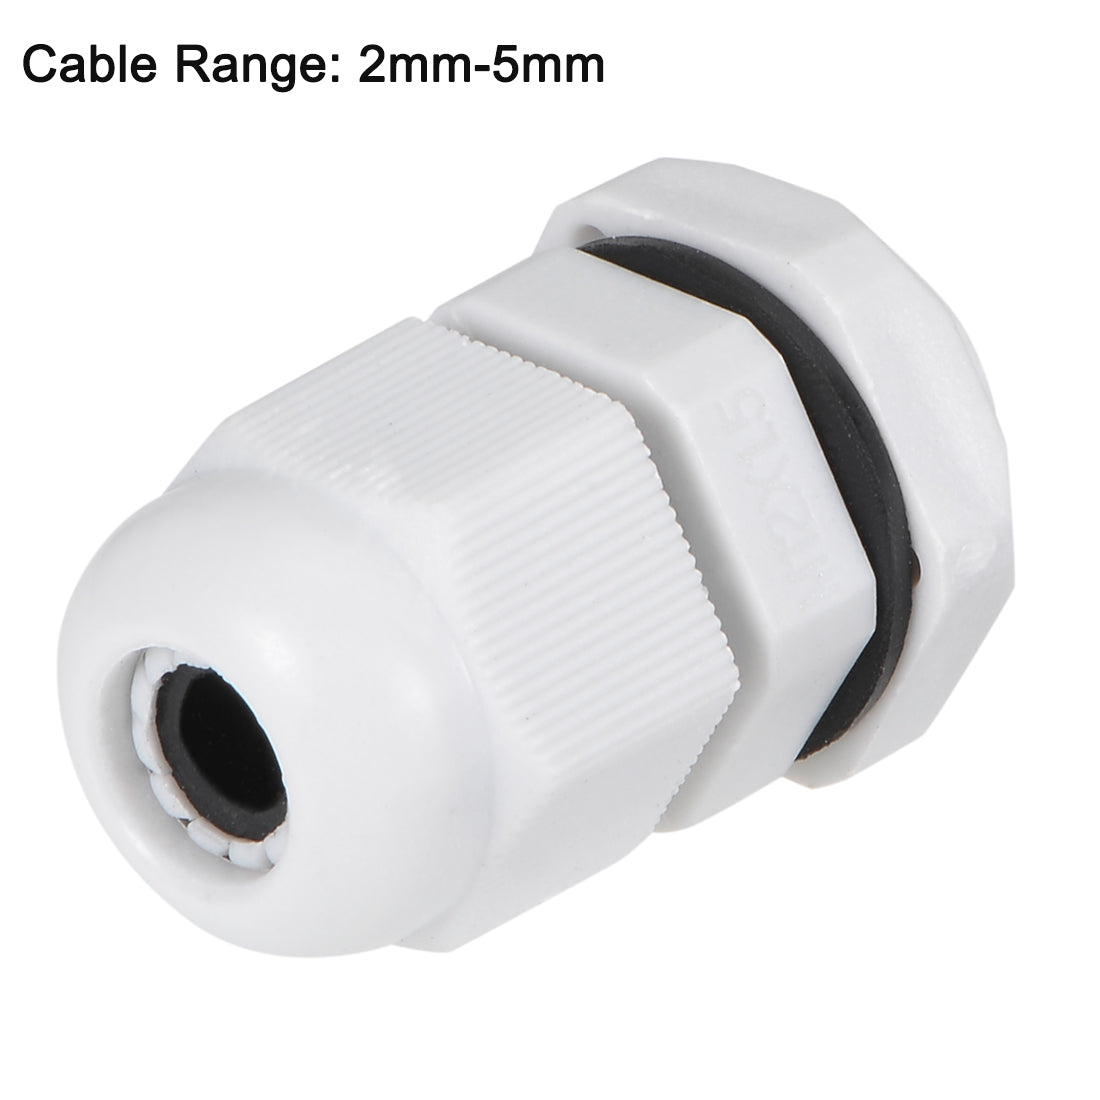 uxcell Uxcell M12x1.5 Cable Gland 2mm-5mm Wire Hole Waterproof Nylon Joint Adjustable Locknut with Washer White 20pcs